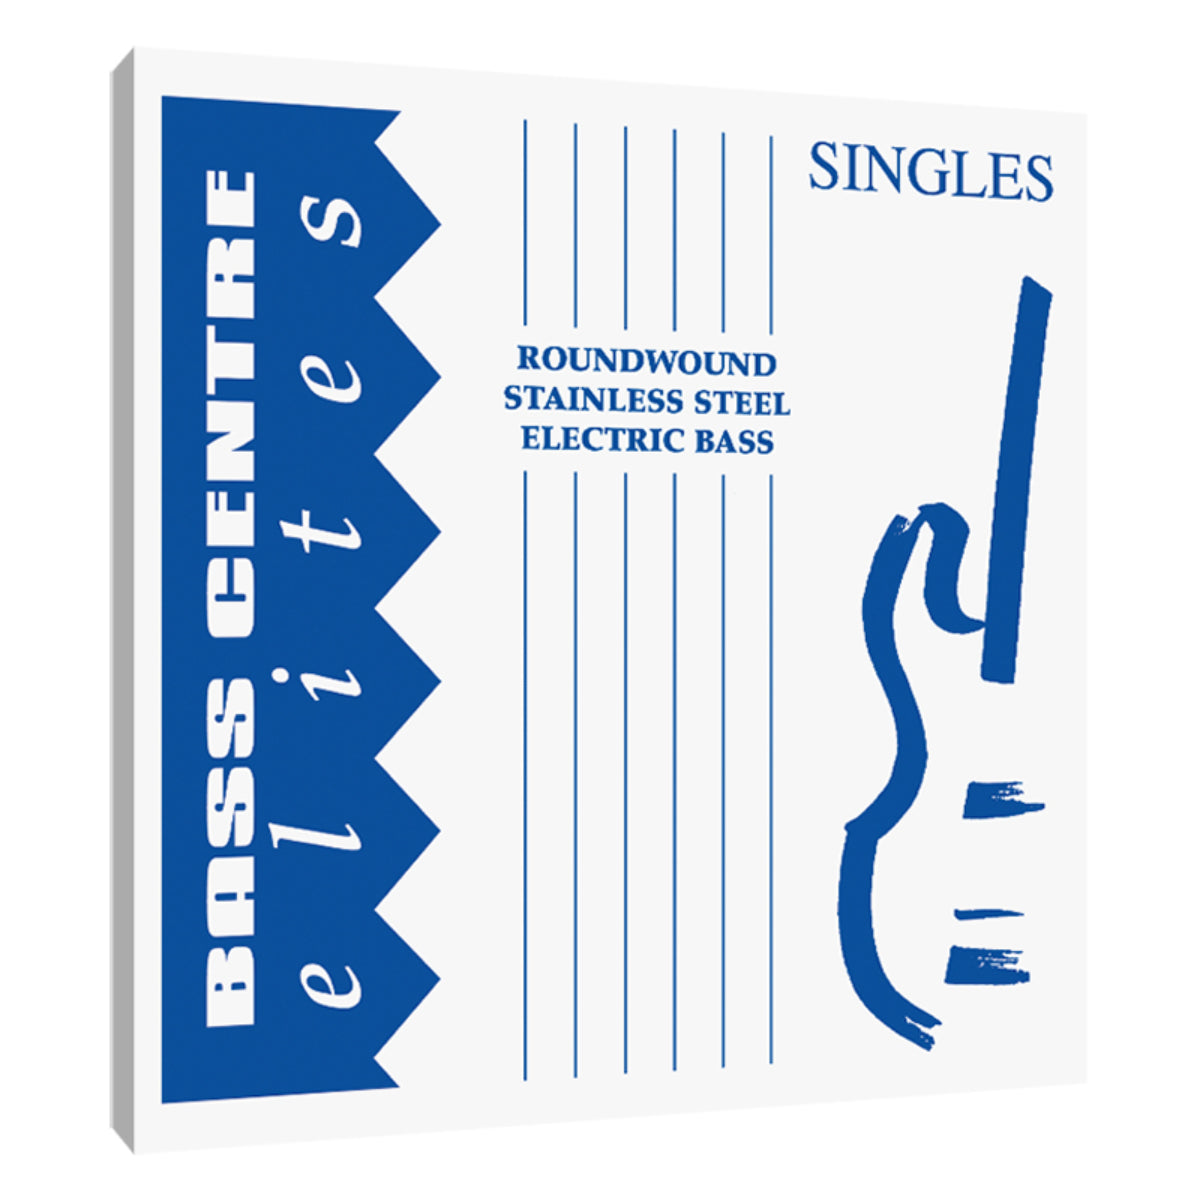 25 Stainless Steel Single Bass String